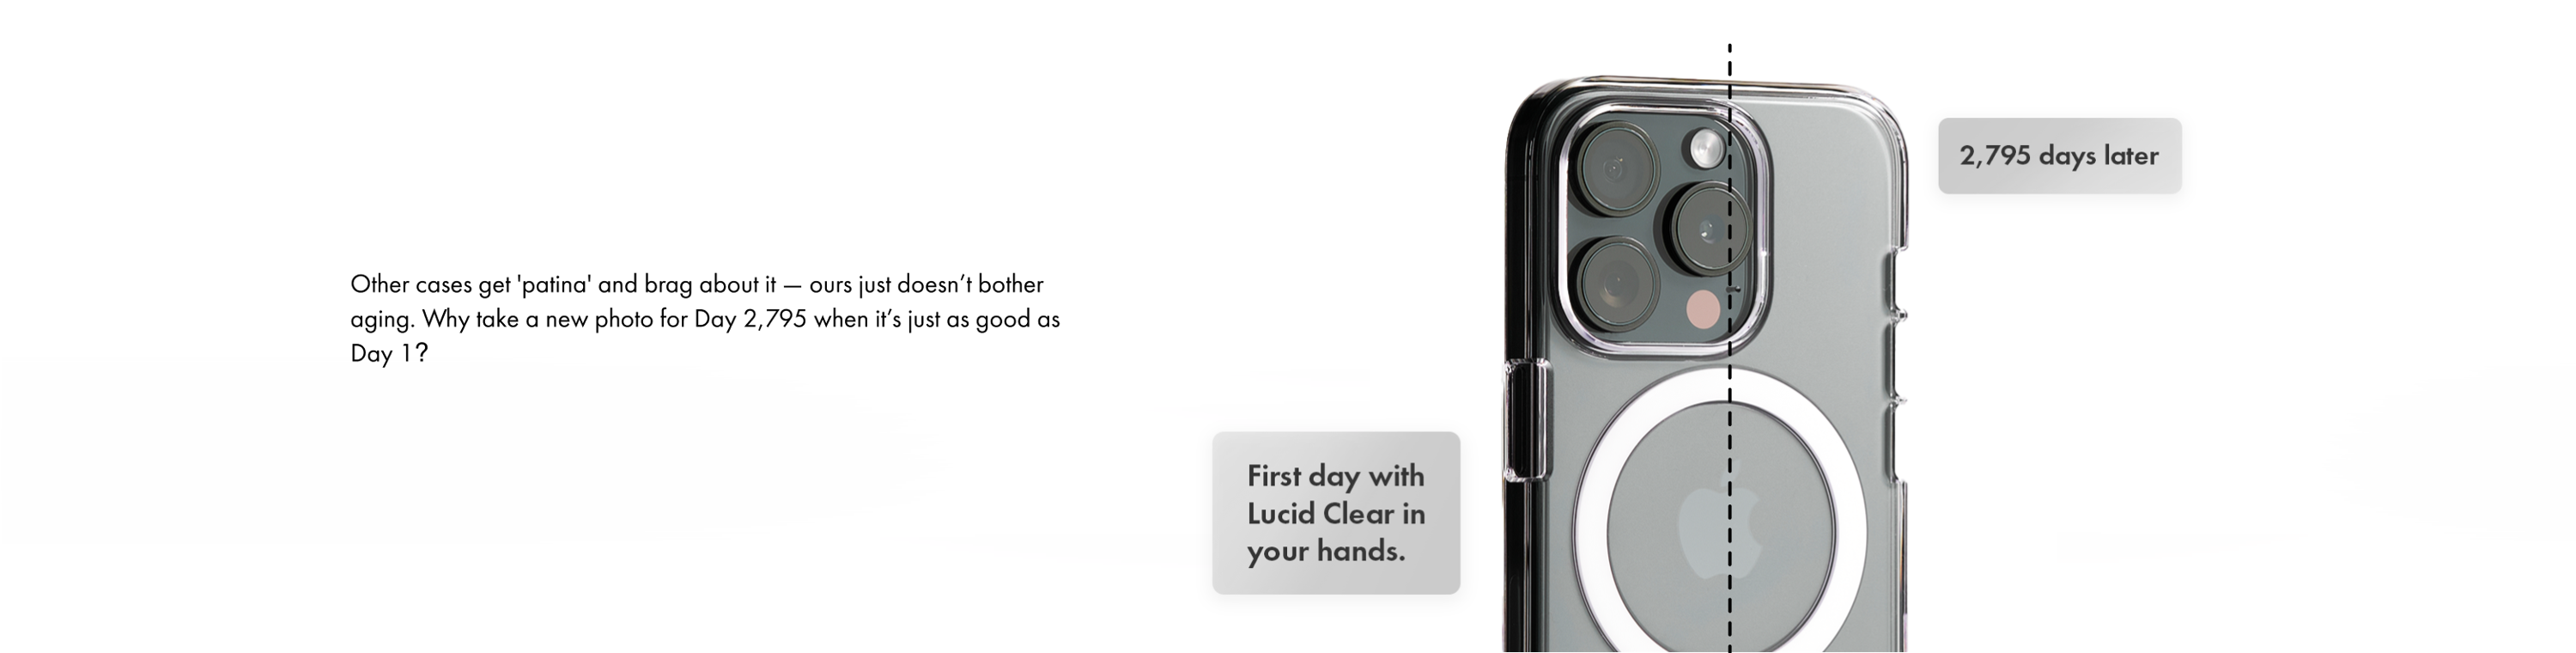 Other cases get 'patina' and brag about it — ours just doesn’t bother aging. Why take a new photo for Day 2,795 when it’s just as good as Day 1?. First day with Lucid Clear in your hands. 2795 days later. Looks the same